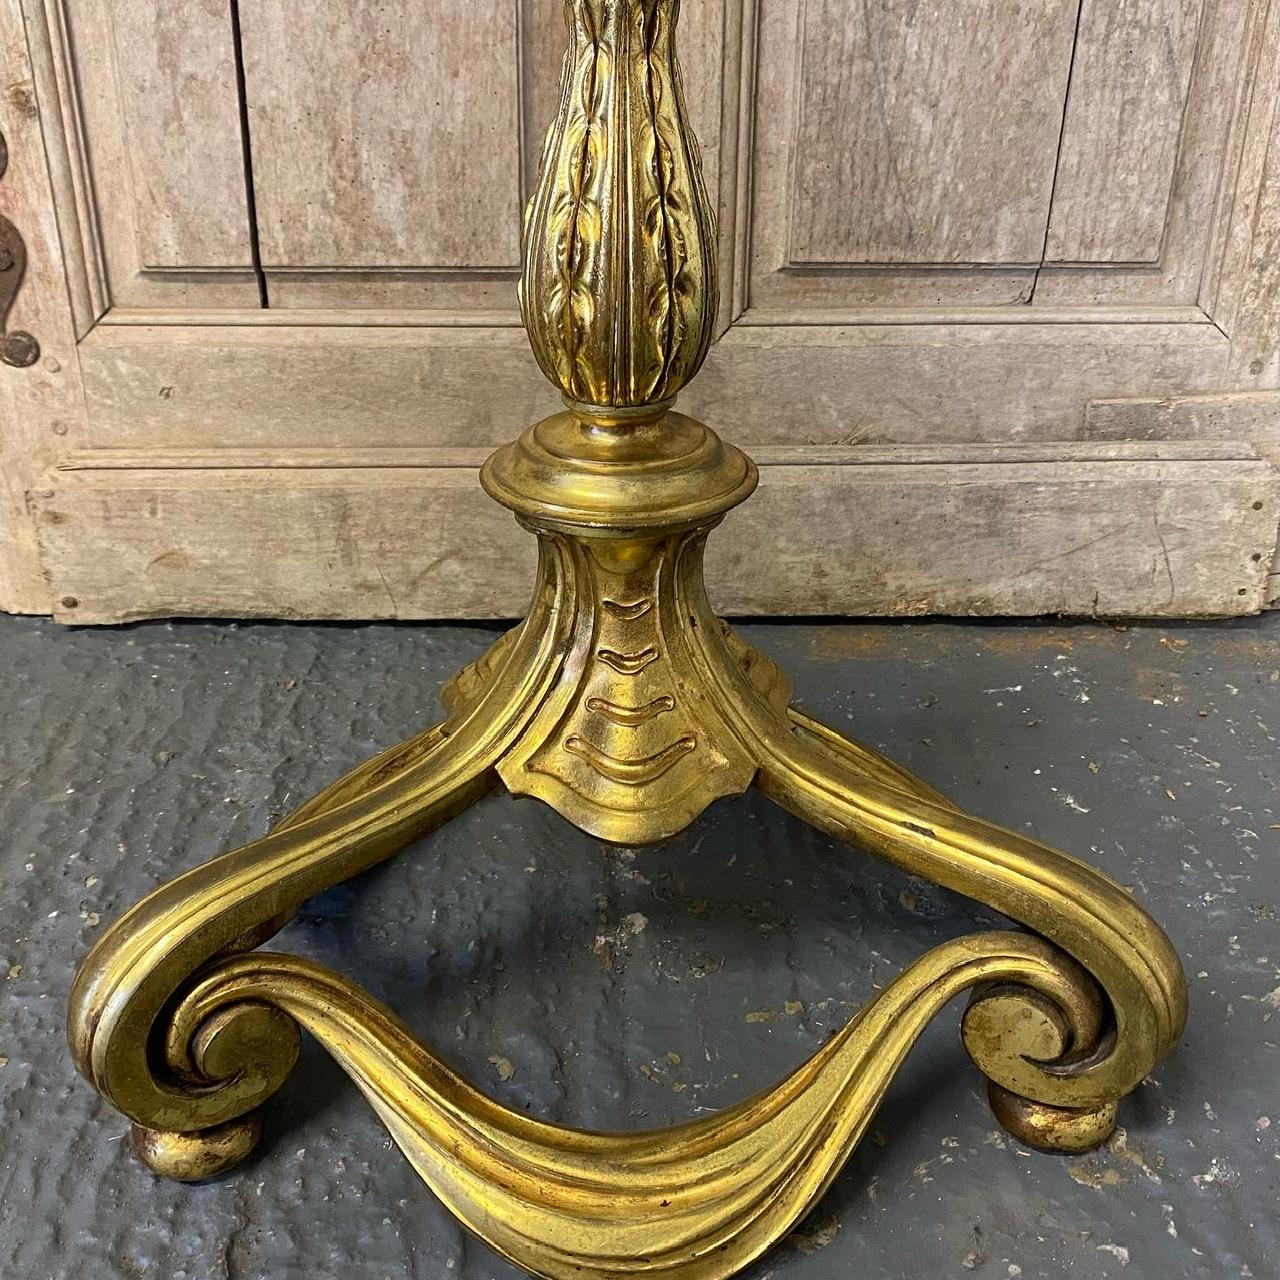 A wonderful quality French gilt standard lamp dating to the 1920s. Lovely organic design, heavy weight so stable and original perfect glass tulip shape shade.
This will need to be completely re wired. In excellent original condition for the